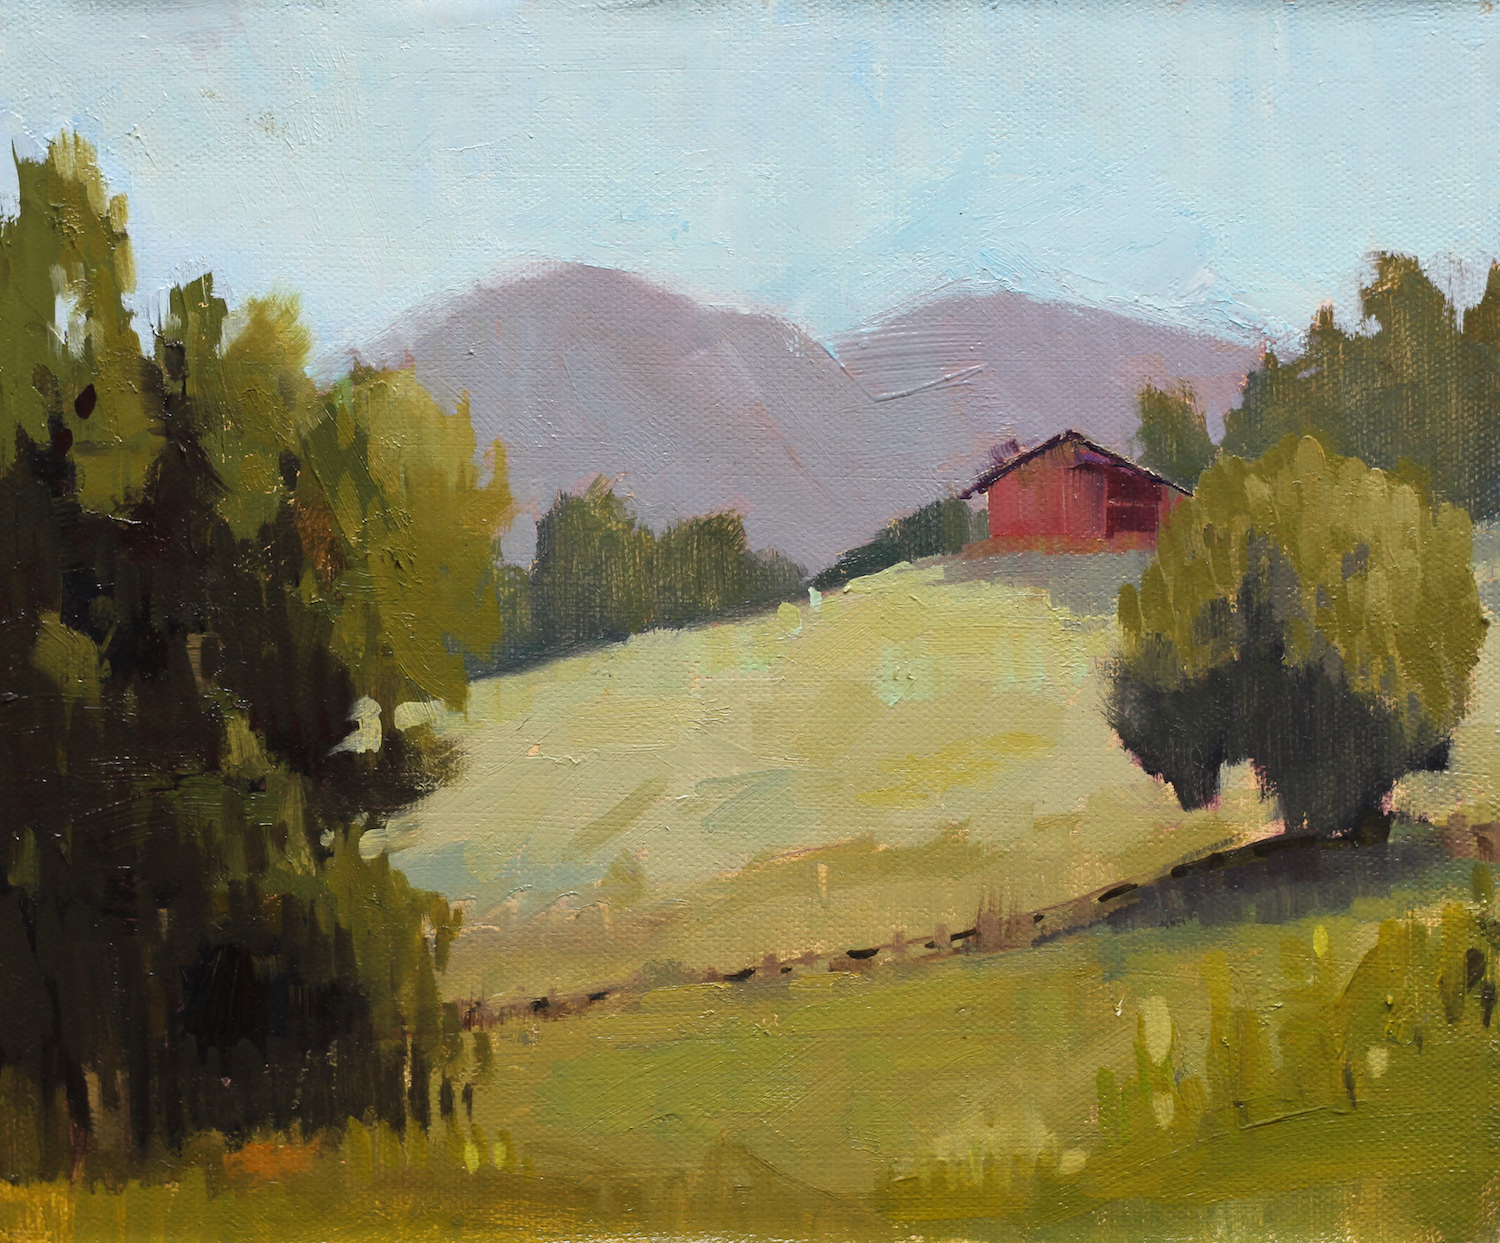  Plein air, Steamboat Springs, CO  Oil on panel  8x10 